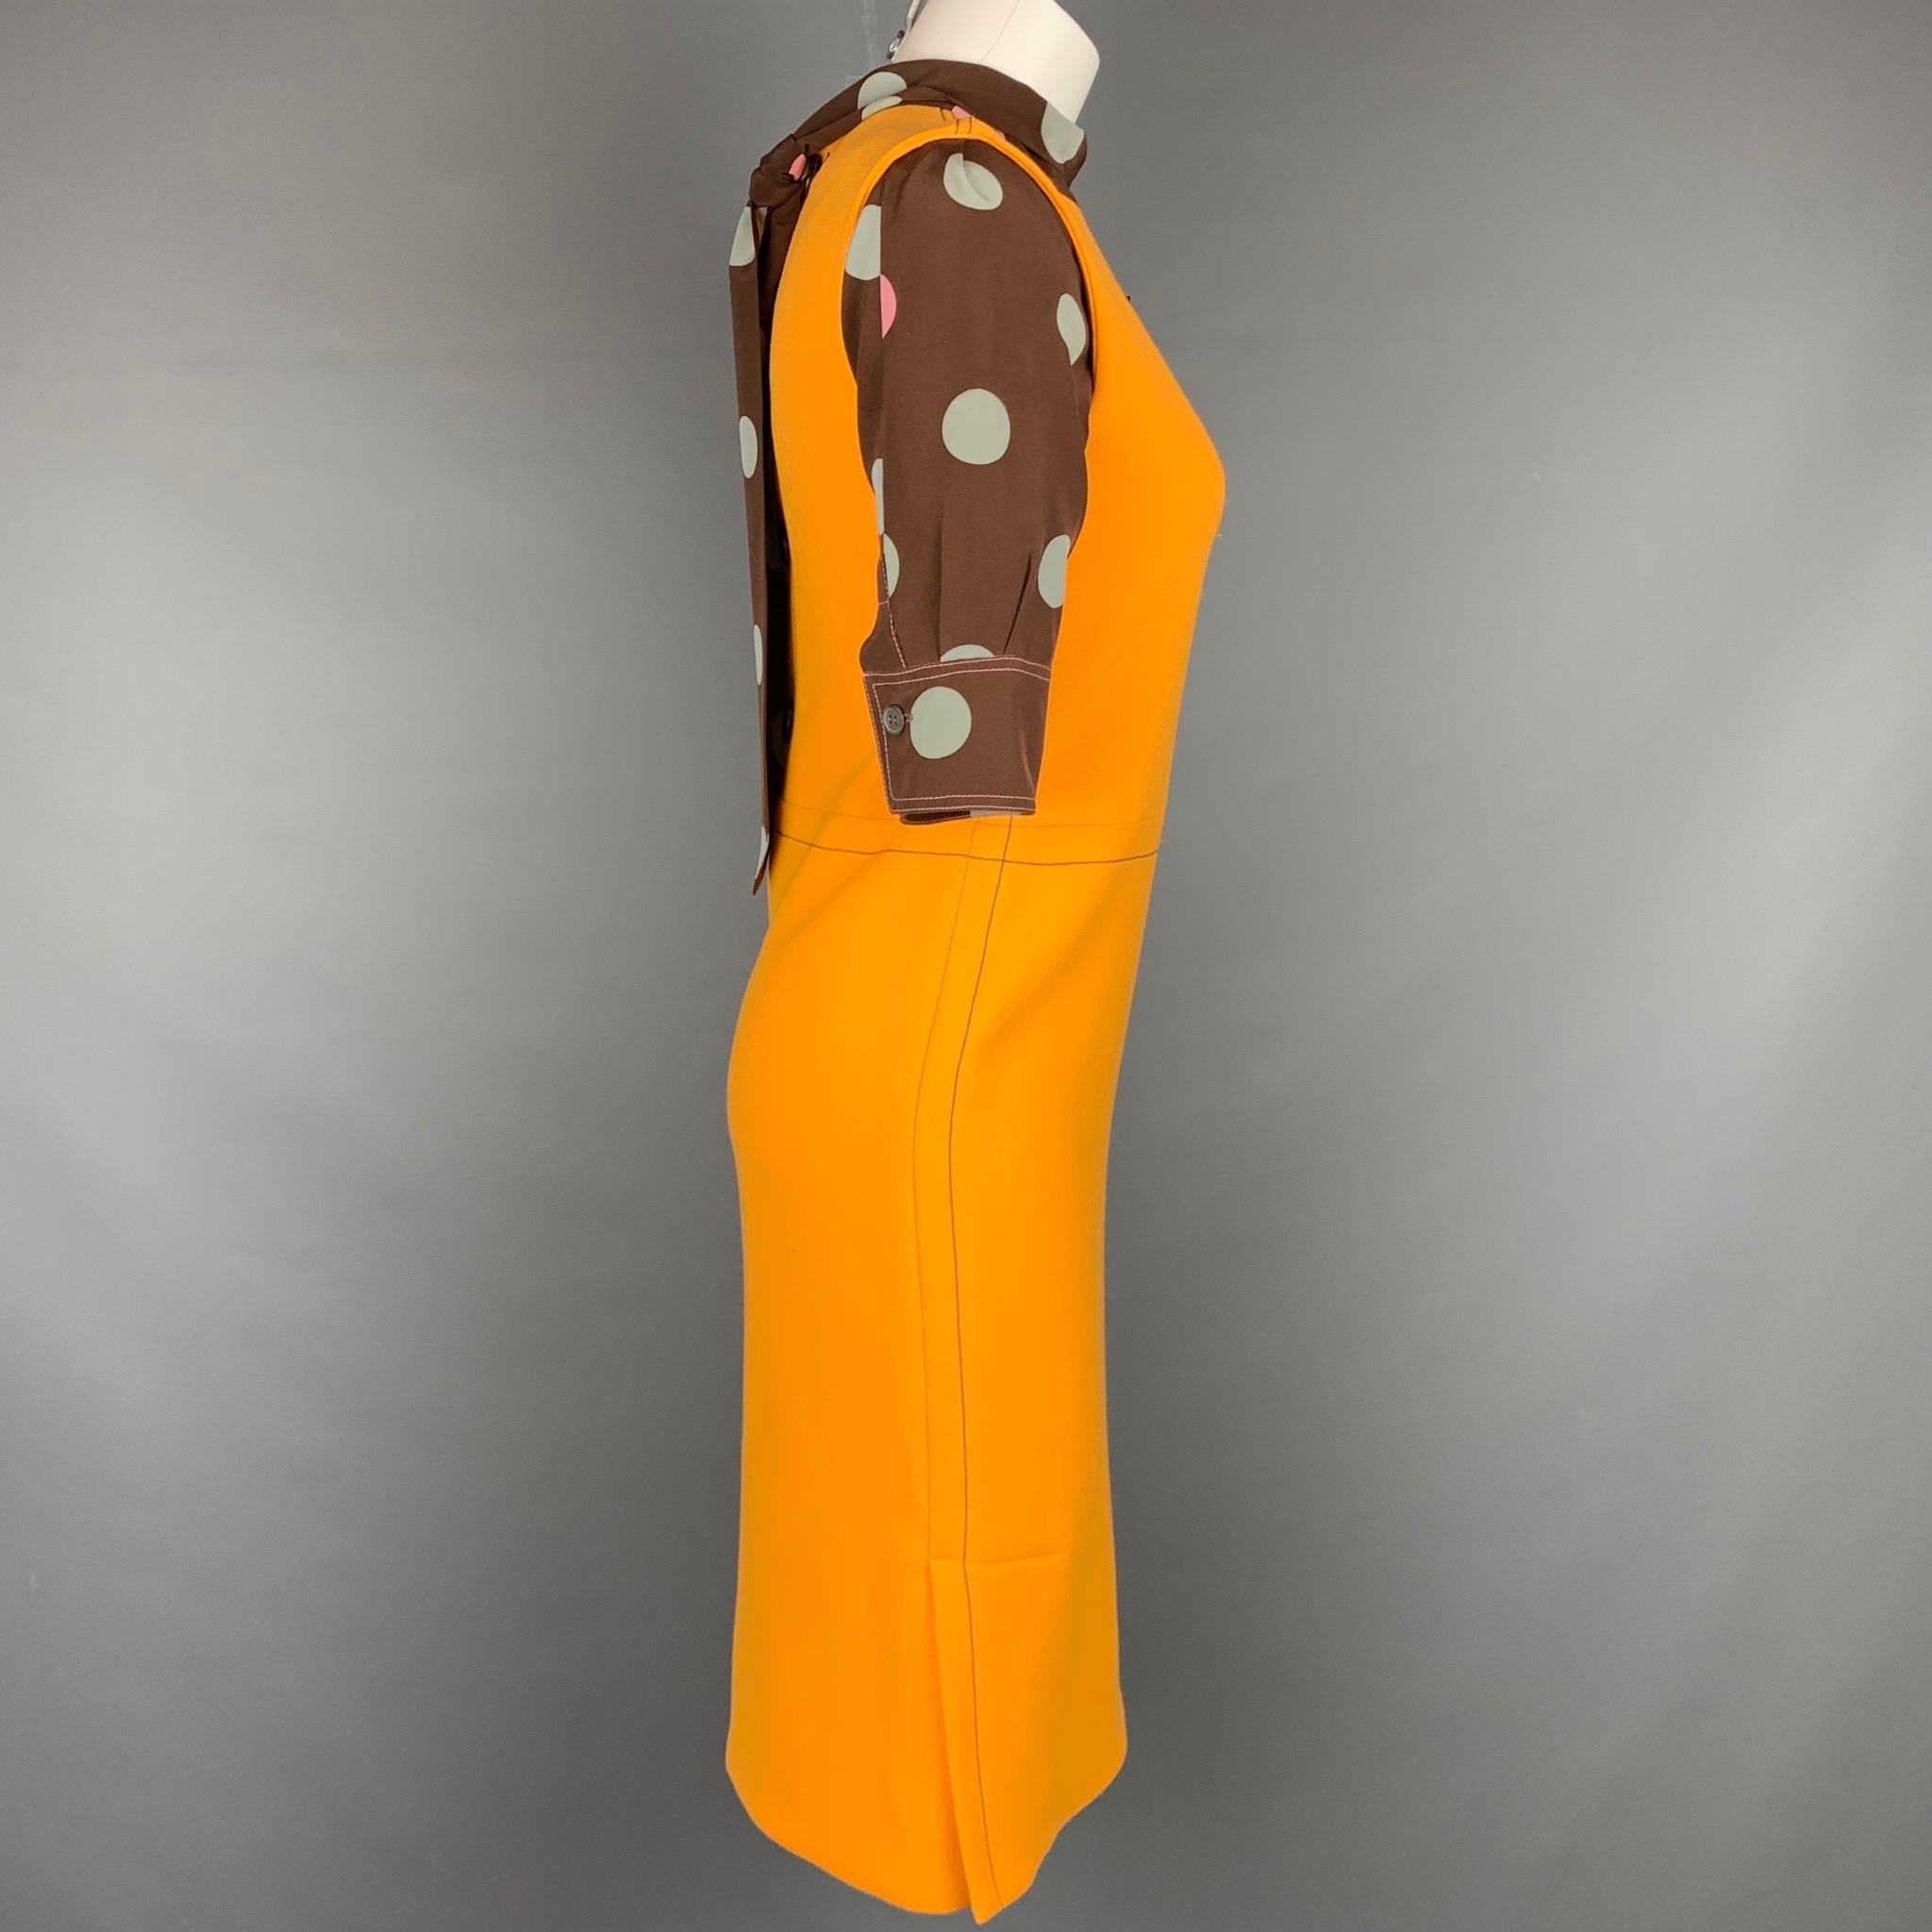 MARNI dress comes in a orange & brown polka dot virgin wool with a silk layer featuring a back tie up design, contrast stitching, and a back buttoned closure. Made in Italy.

Very Good Pre-Owned Condition.
Marked: 36

Measurements:

Shoulder: 13.5